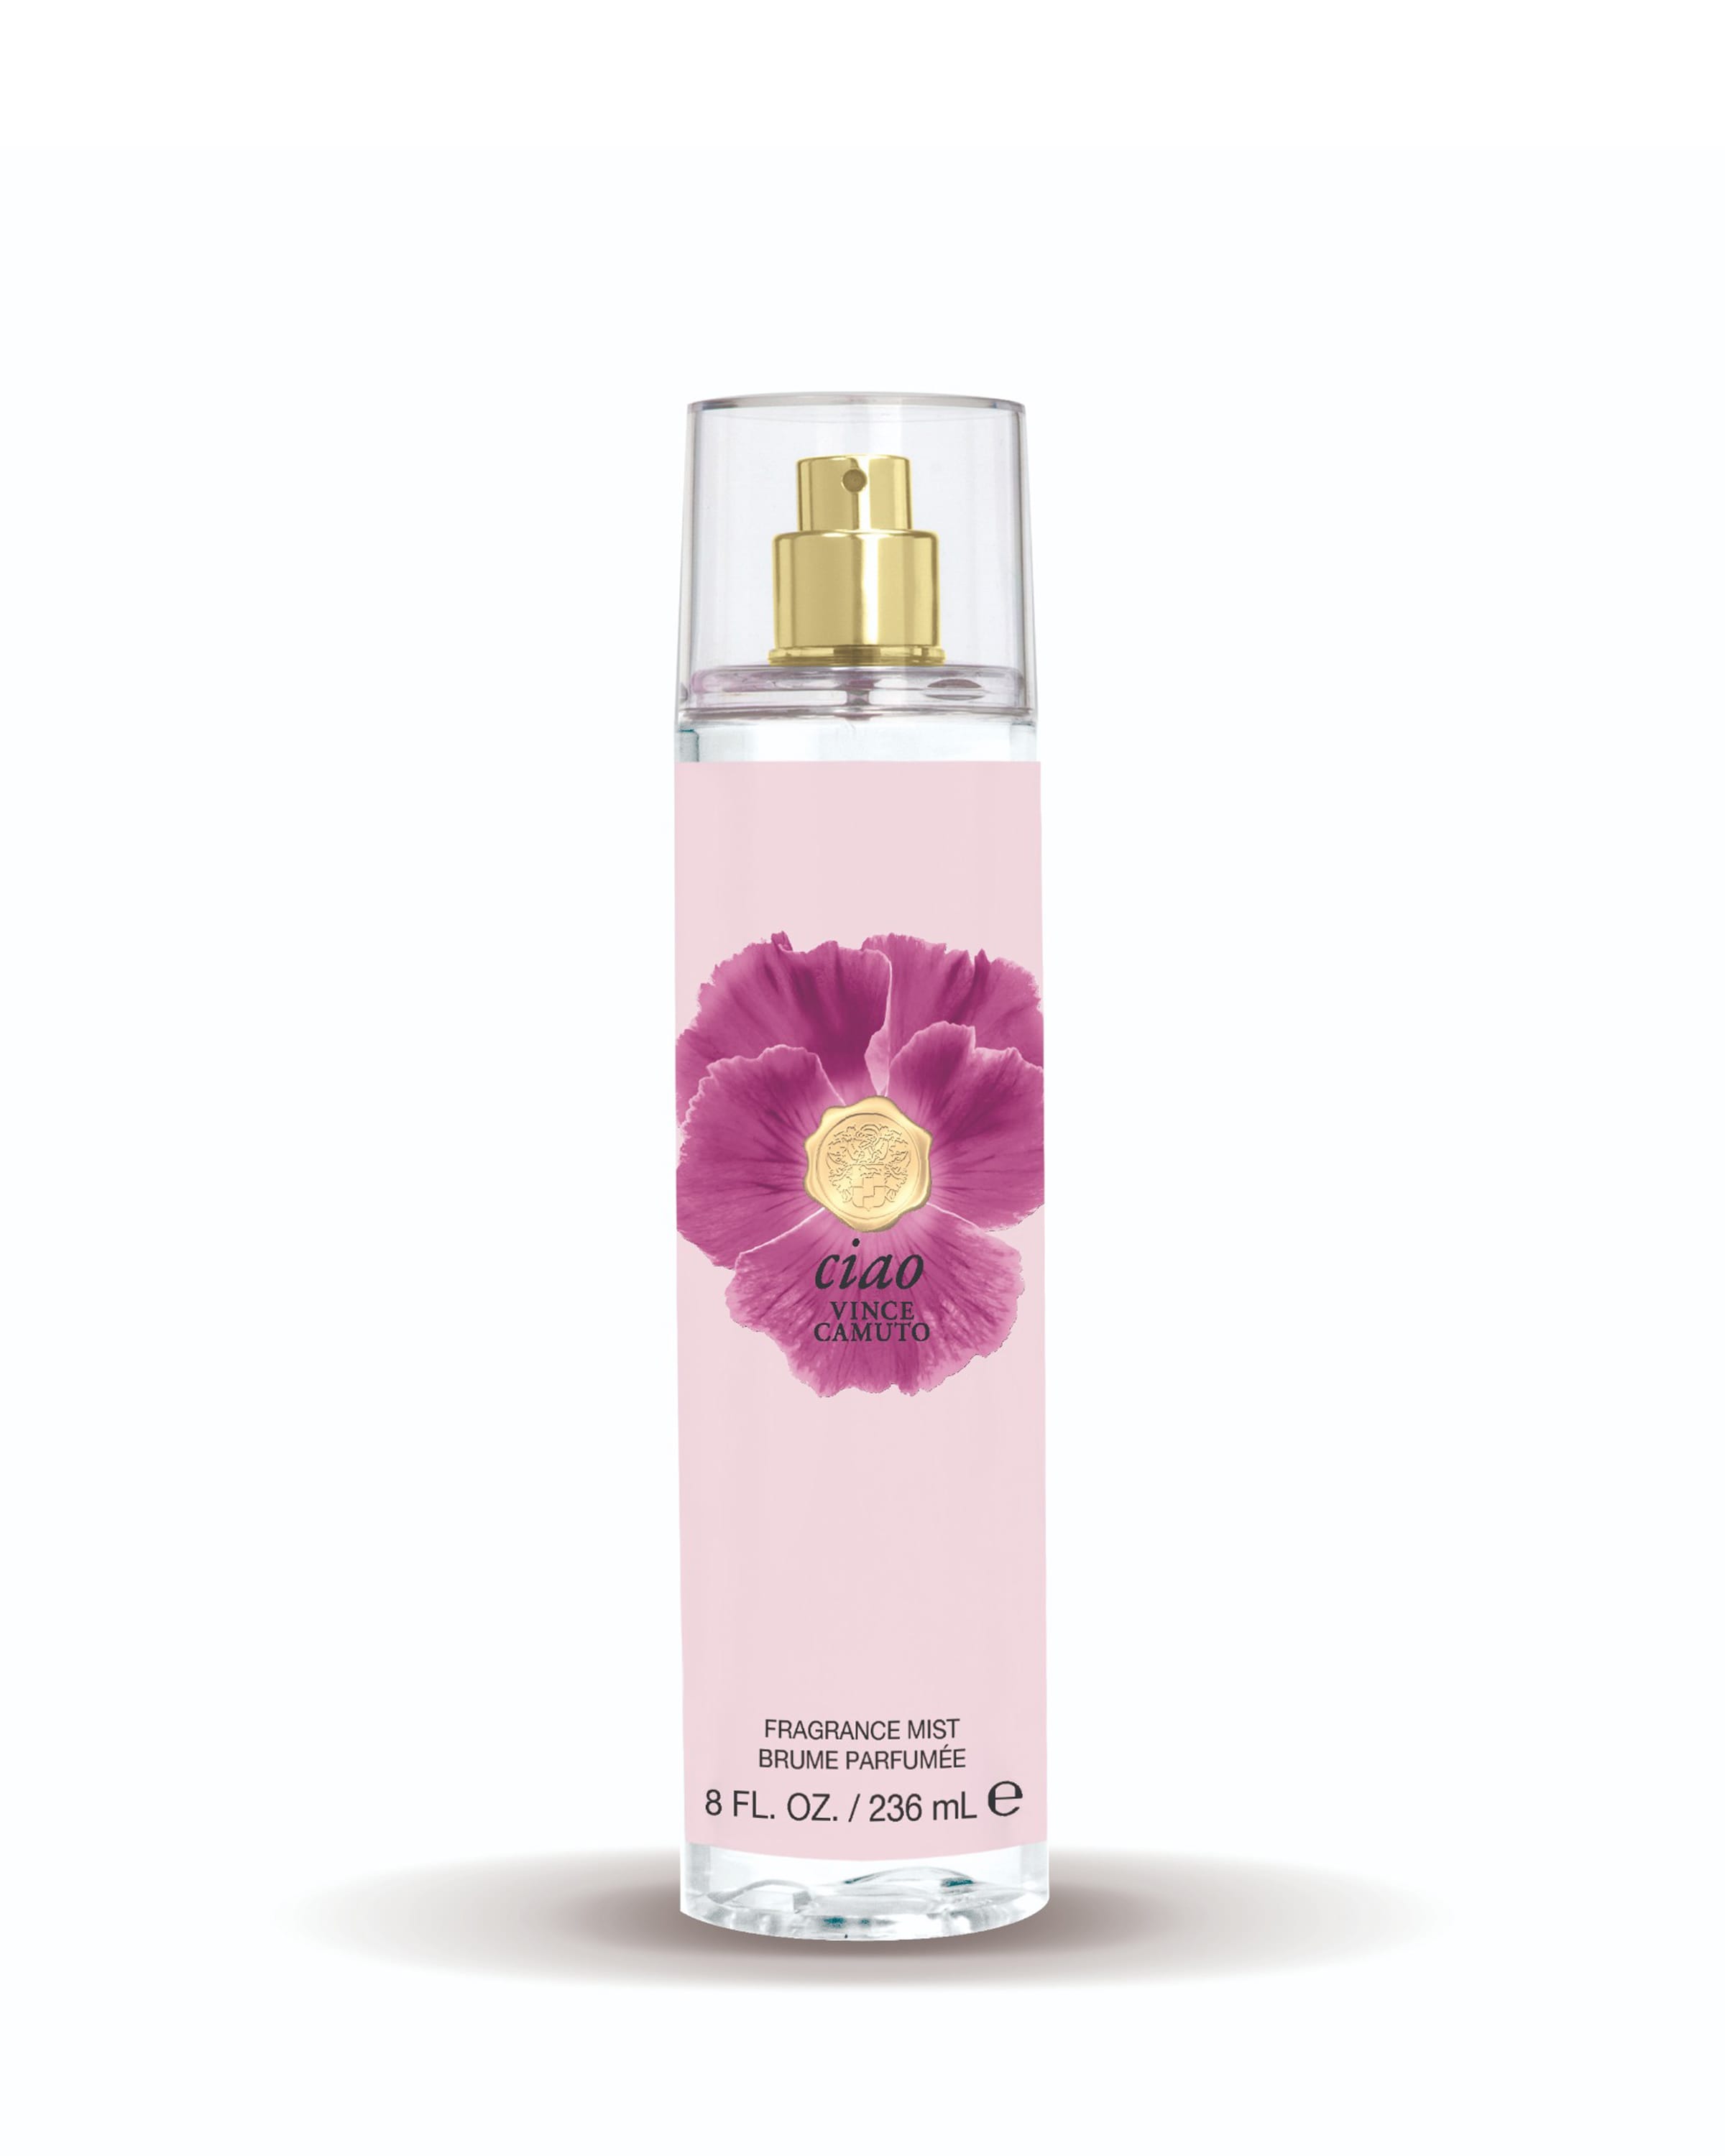 Vince Camuto Ciao Vince Camuto Body Mist 8 oz.